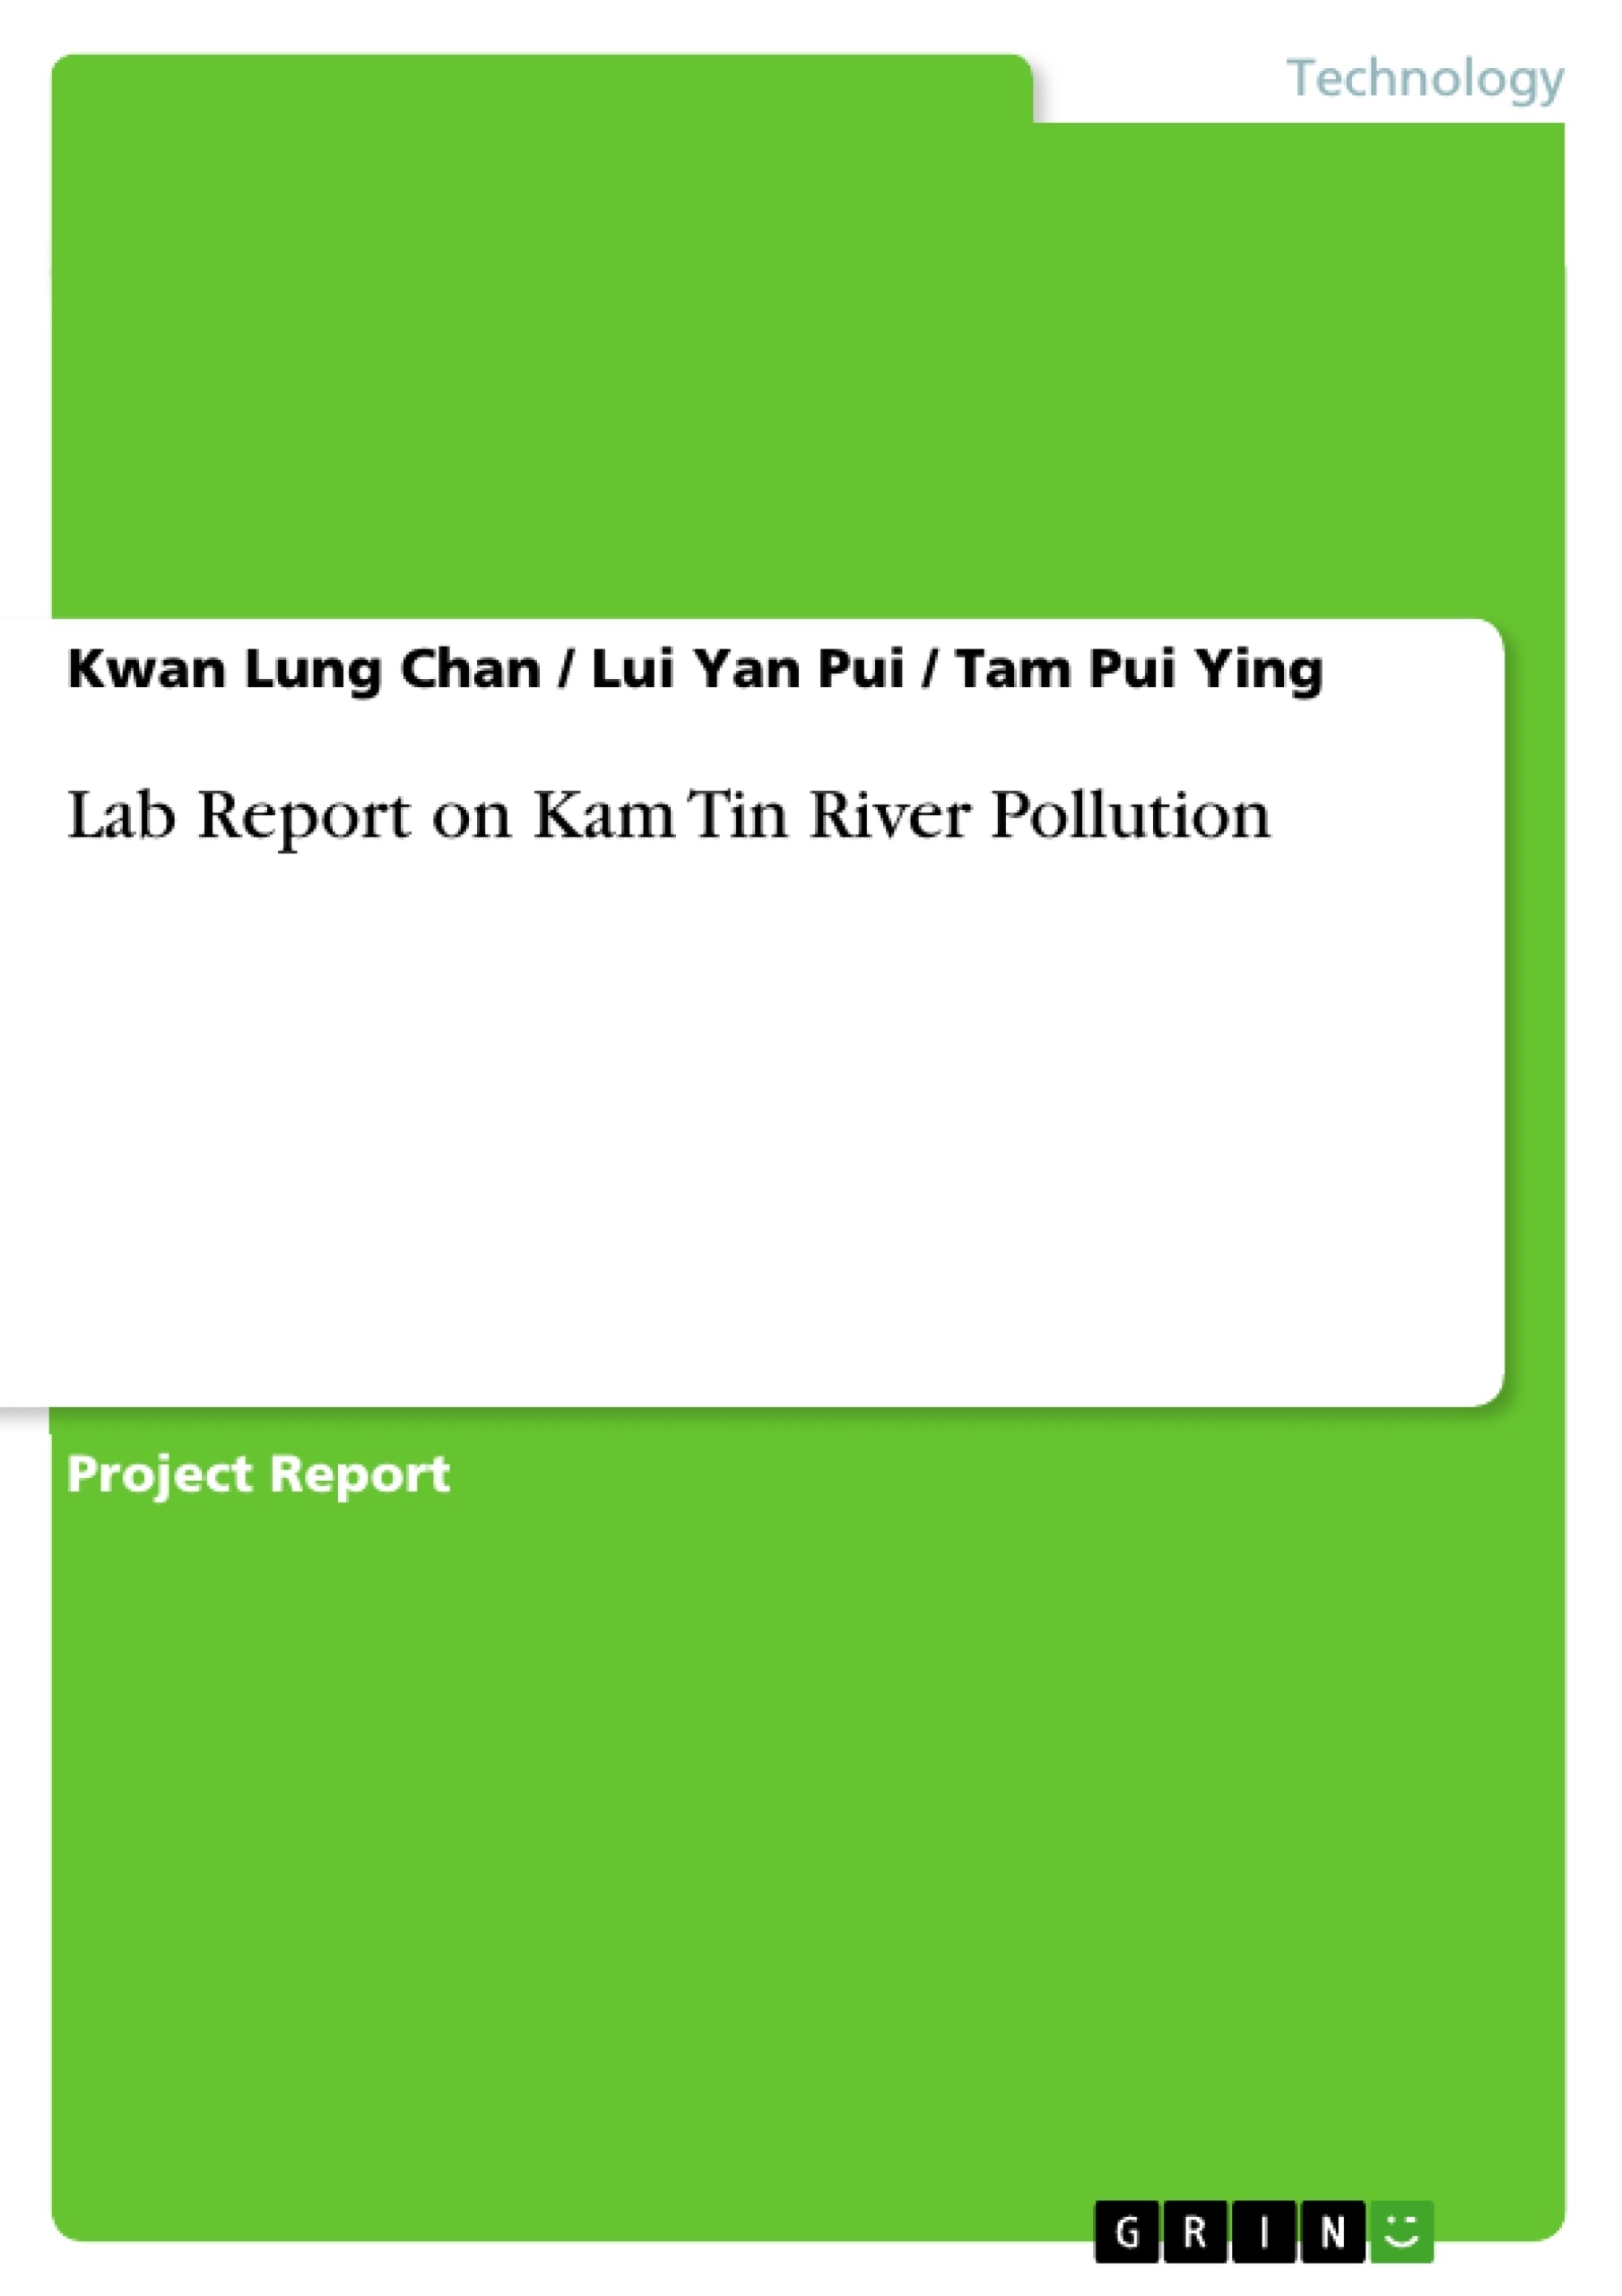 Titre: Lab Report on Kam Tin River Pollution